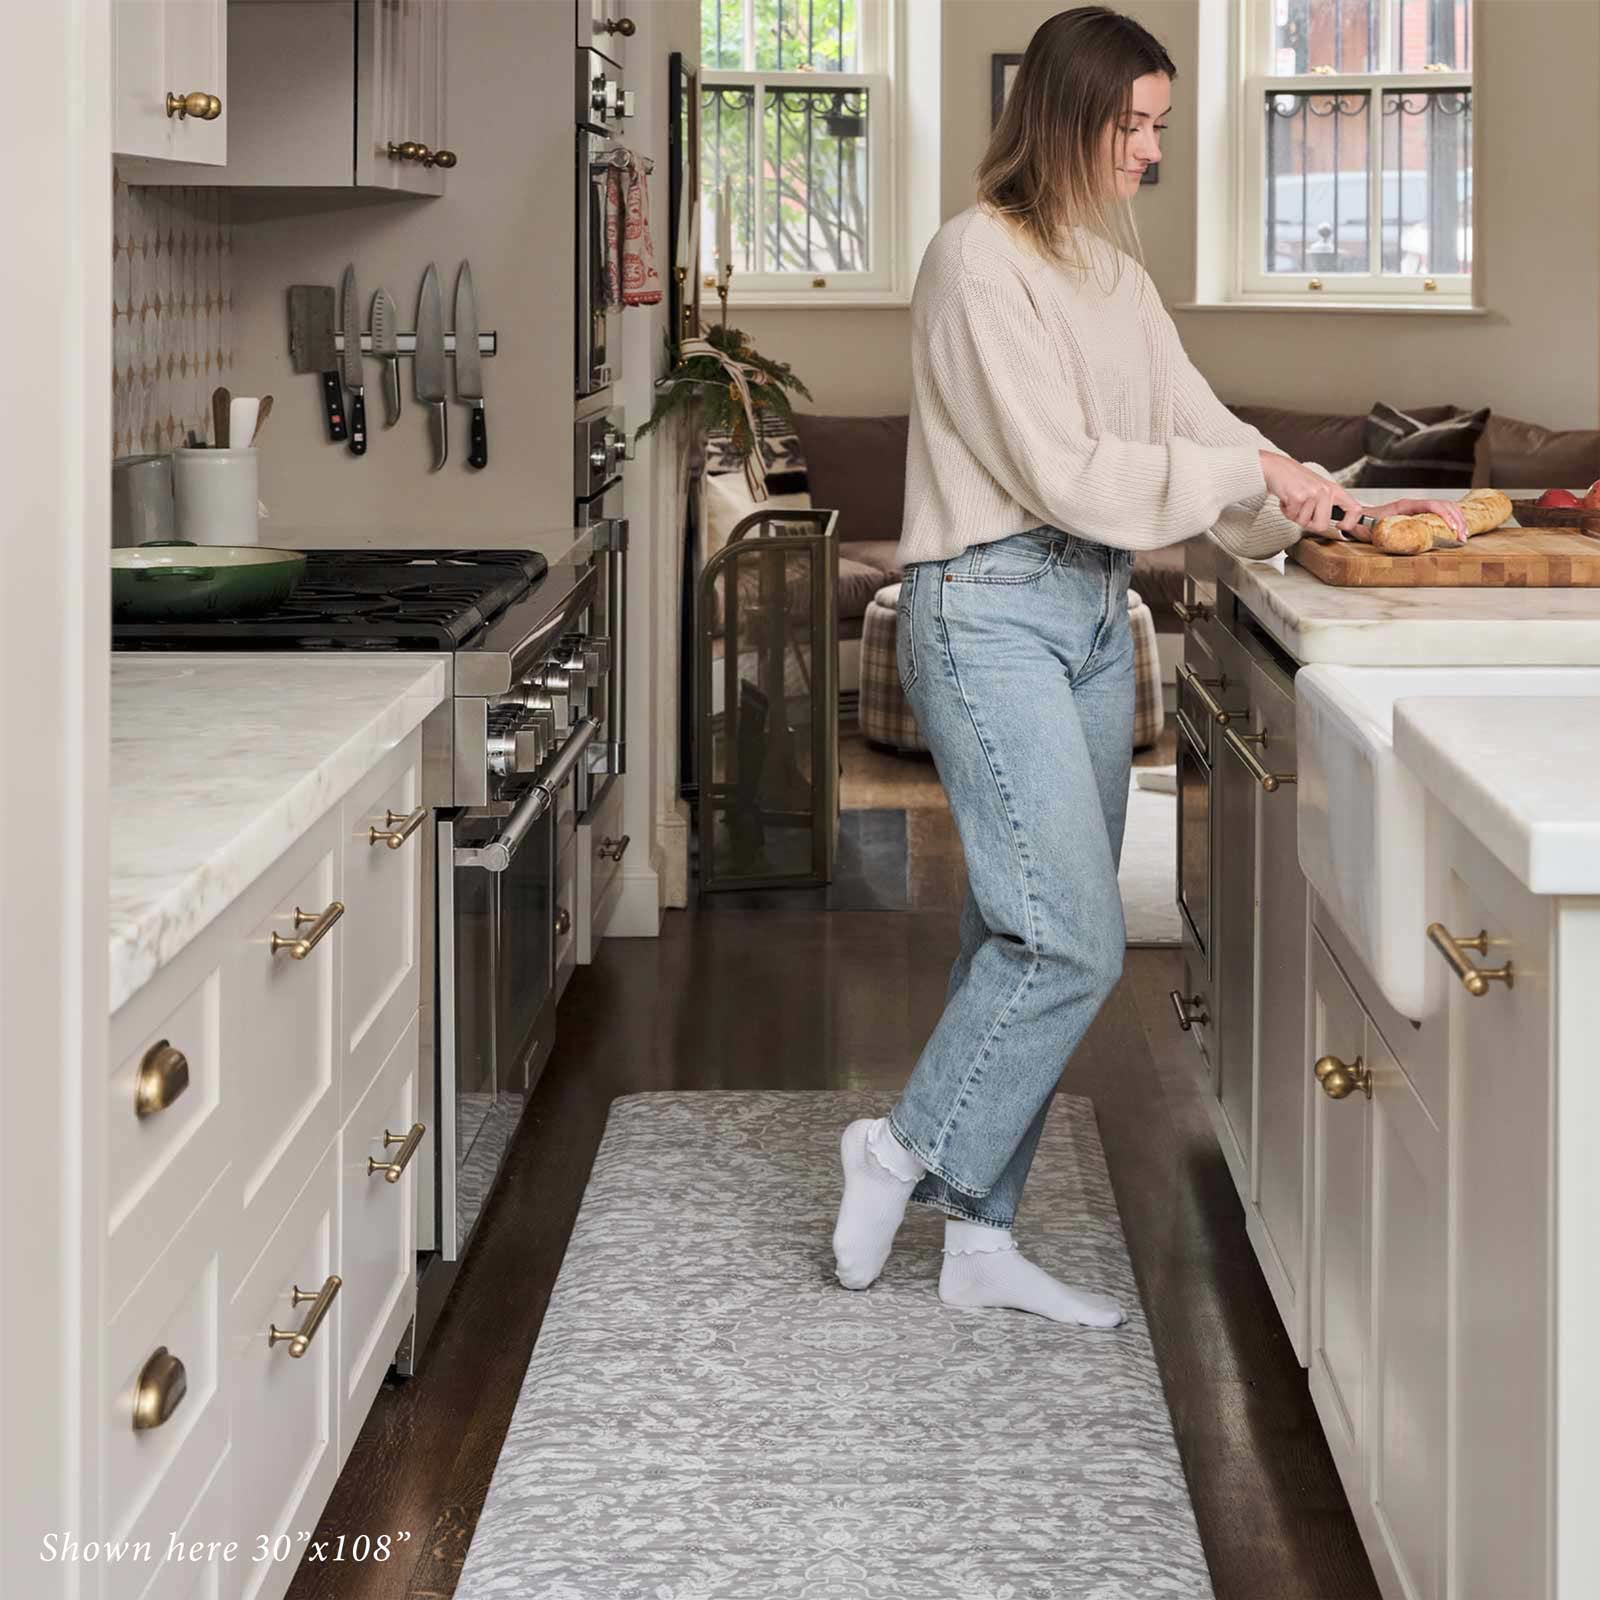 Emile earl grey gray and white floral standing mat shown in kitchen in size 30x108 with woman standing on the mat cutting bread on a cutting board on the counter